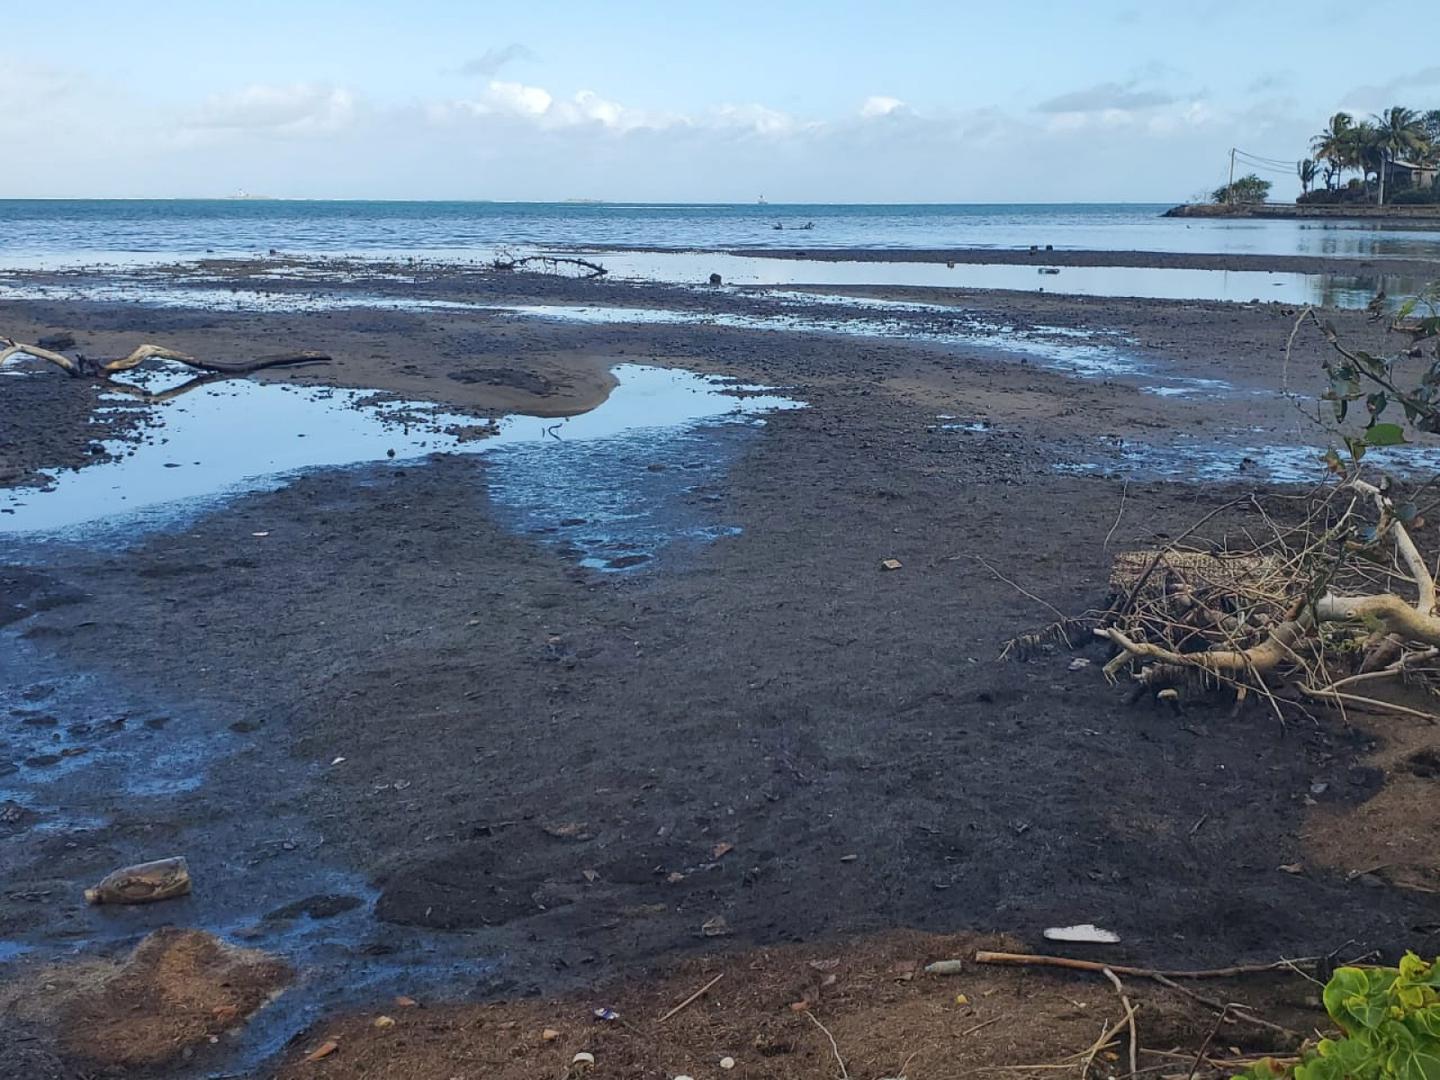 A coastline near Bois Des Amourettes is seen after Japanese bulk carrier MV Wakashio has struck a coral reef causing an oil spill A coastline near Bois Des Amourettes is seen after Japanese bulk carrier MV Wakashio has struck a coral reef causing an oil spill, in Mauritius, August 18, 2020 in this picture obtained from social media. Picture obtained by REUTERS  THIS IMAGE HAS BEEN SUPPLIED BY A THIRD PARTY. NO RESALES. NO ARCHIVES. OBTAINED BY REUTERS